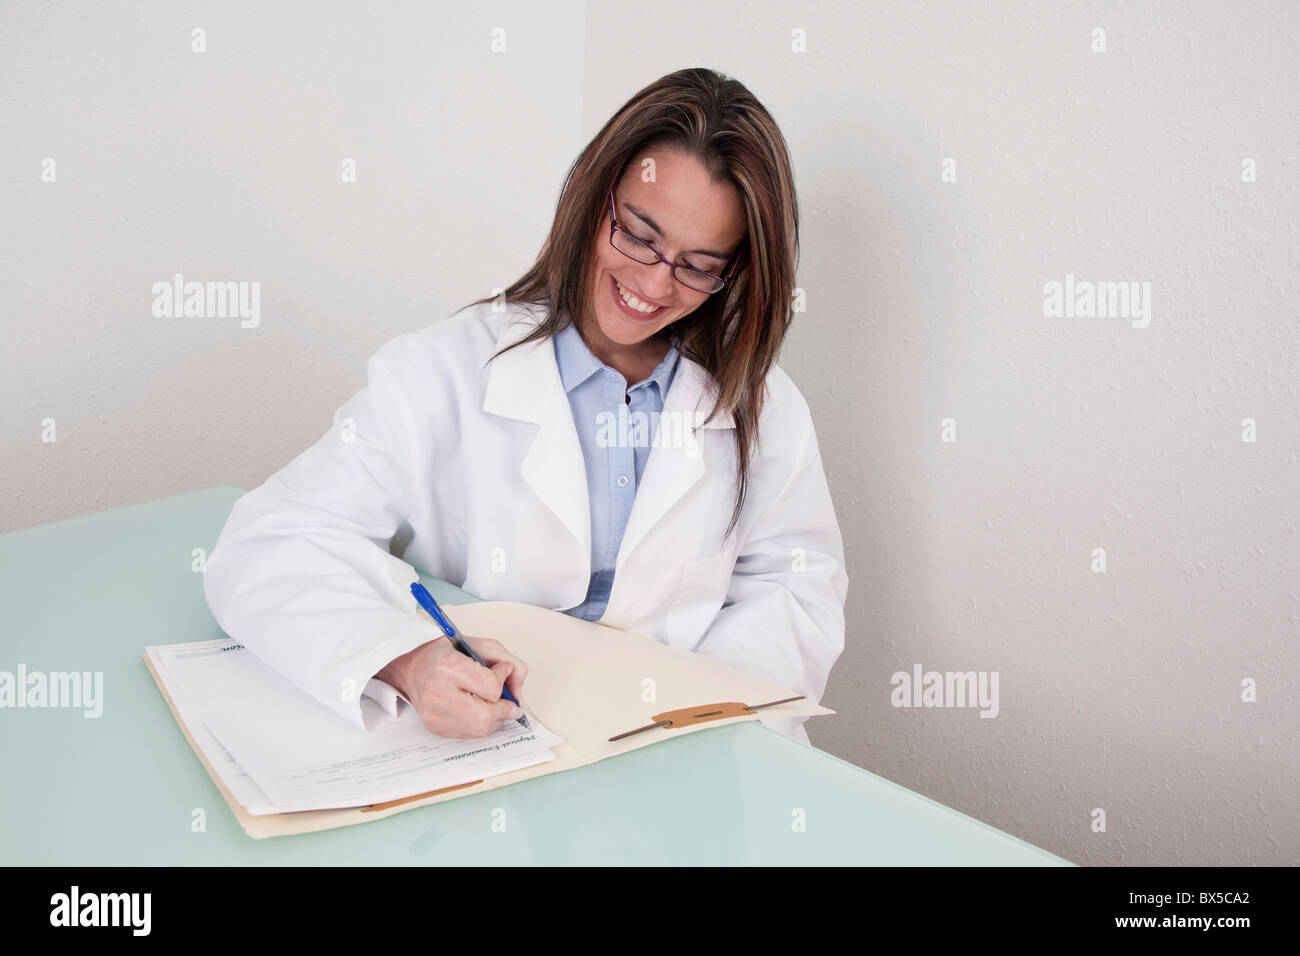 Smiling young doctor working on a patient file Stock Photo